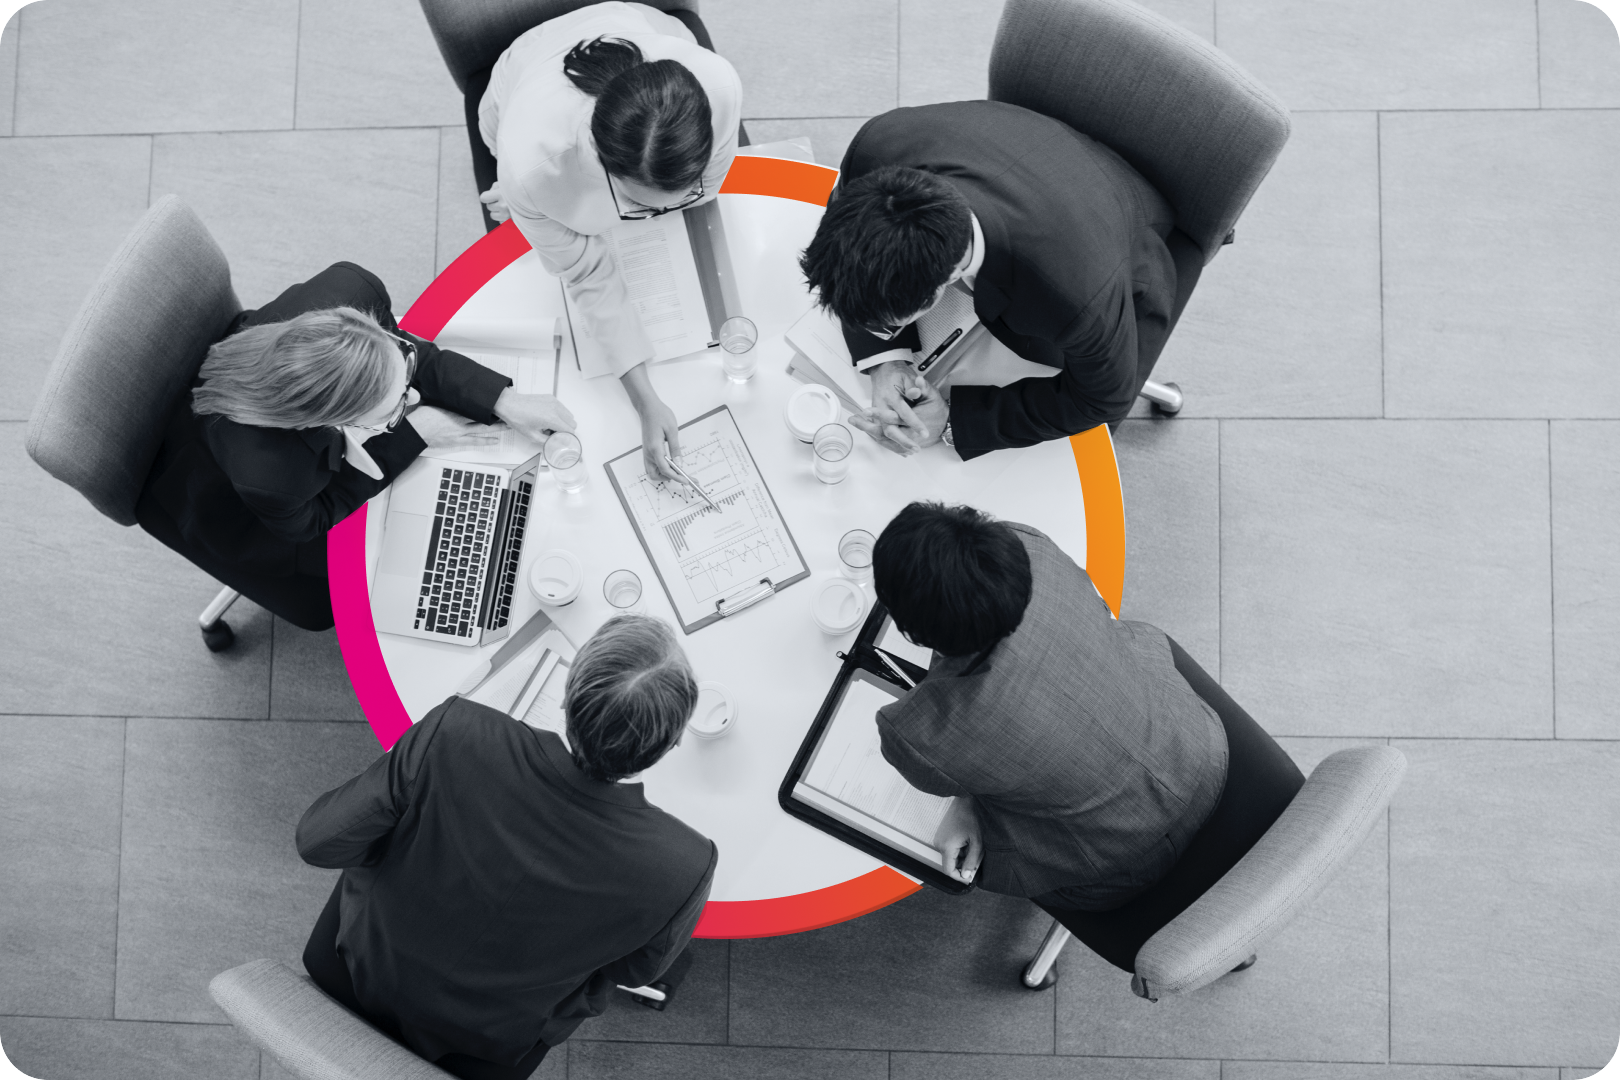 A bird's eye view of 5 people working together across a round table